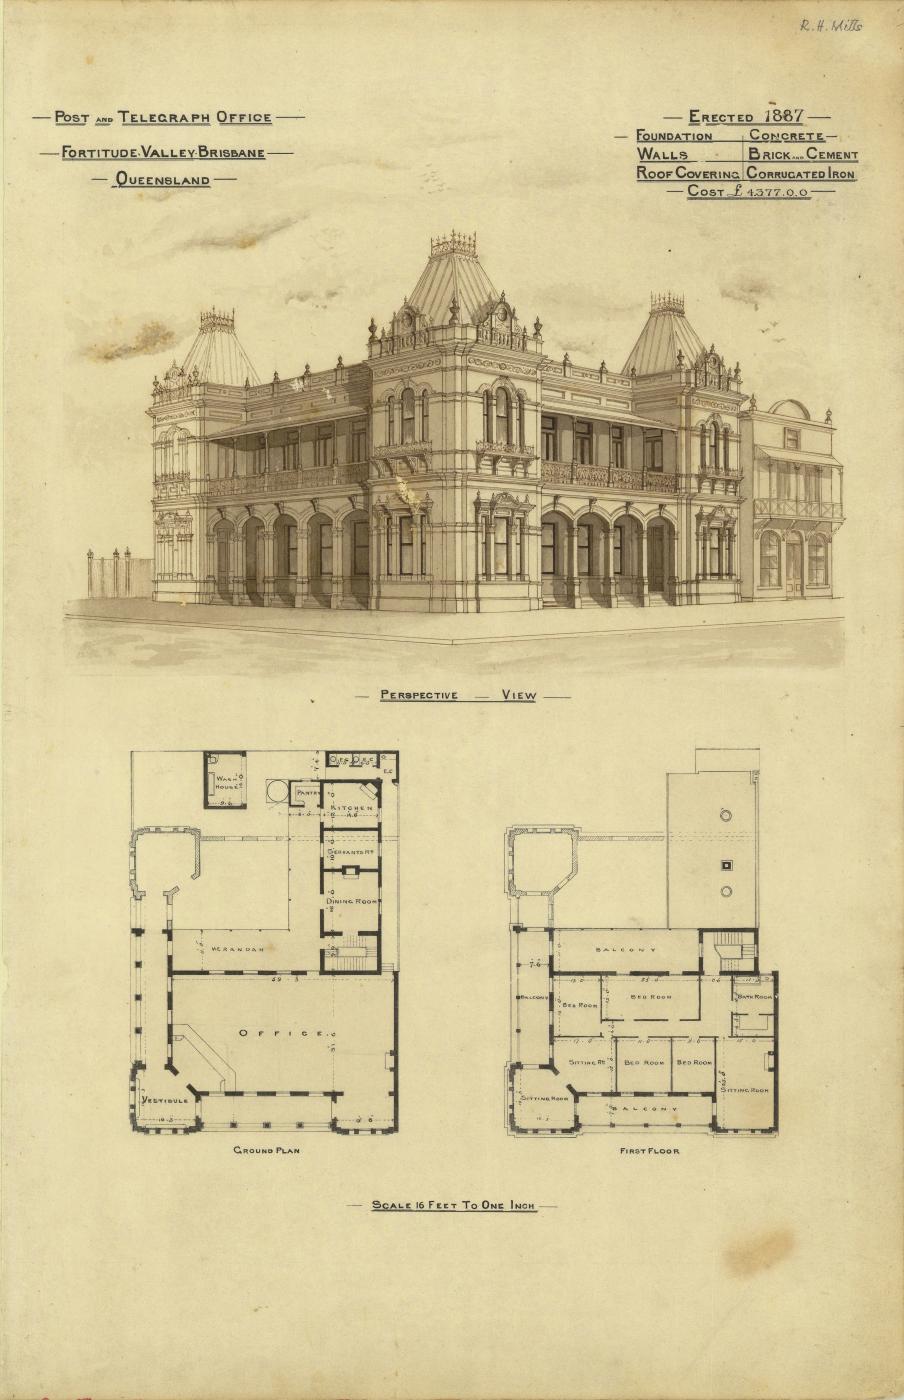 Architectural plans of the Post and Telegraph Office, Fortitude Valley